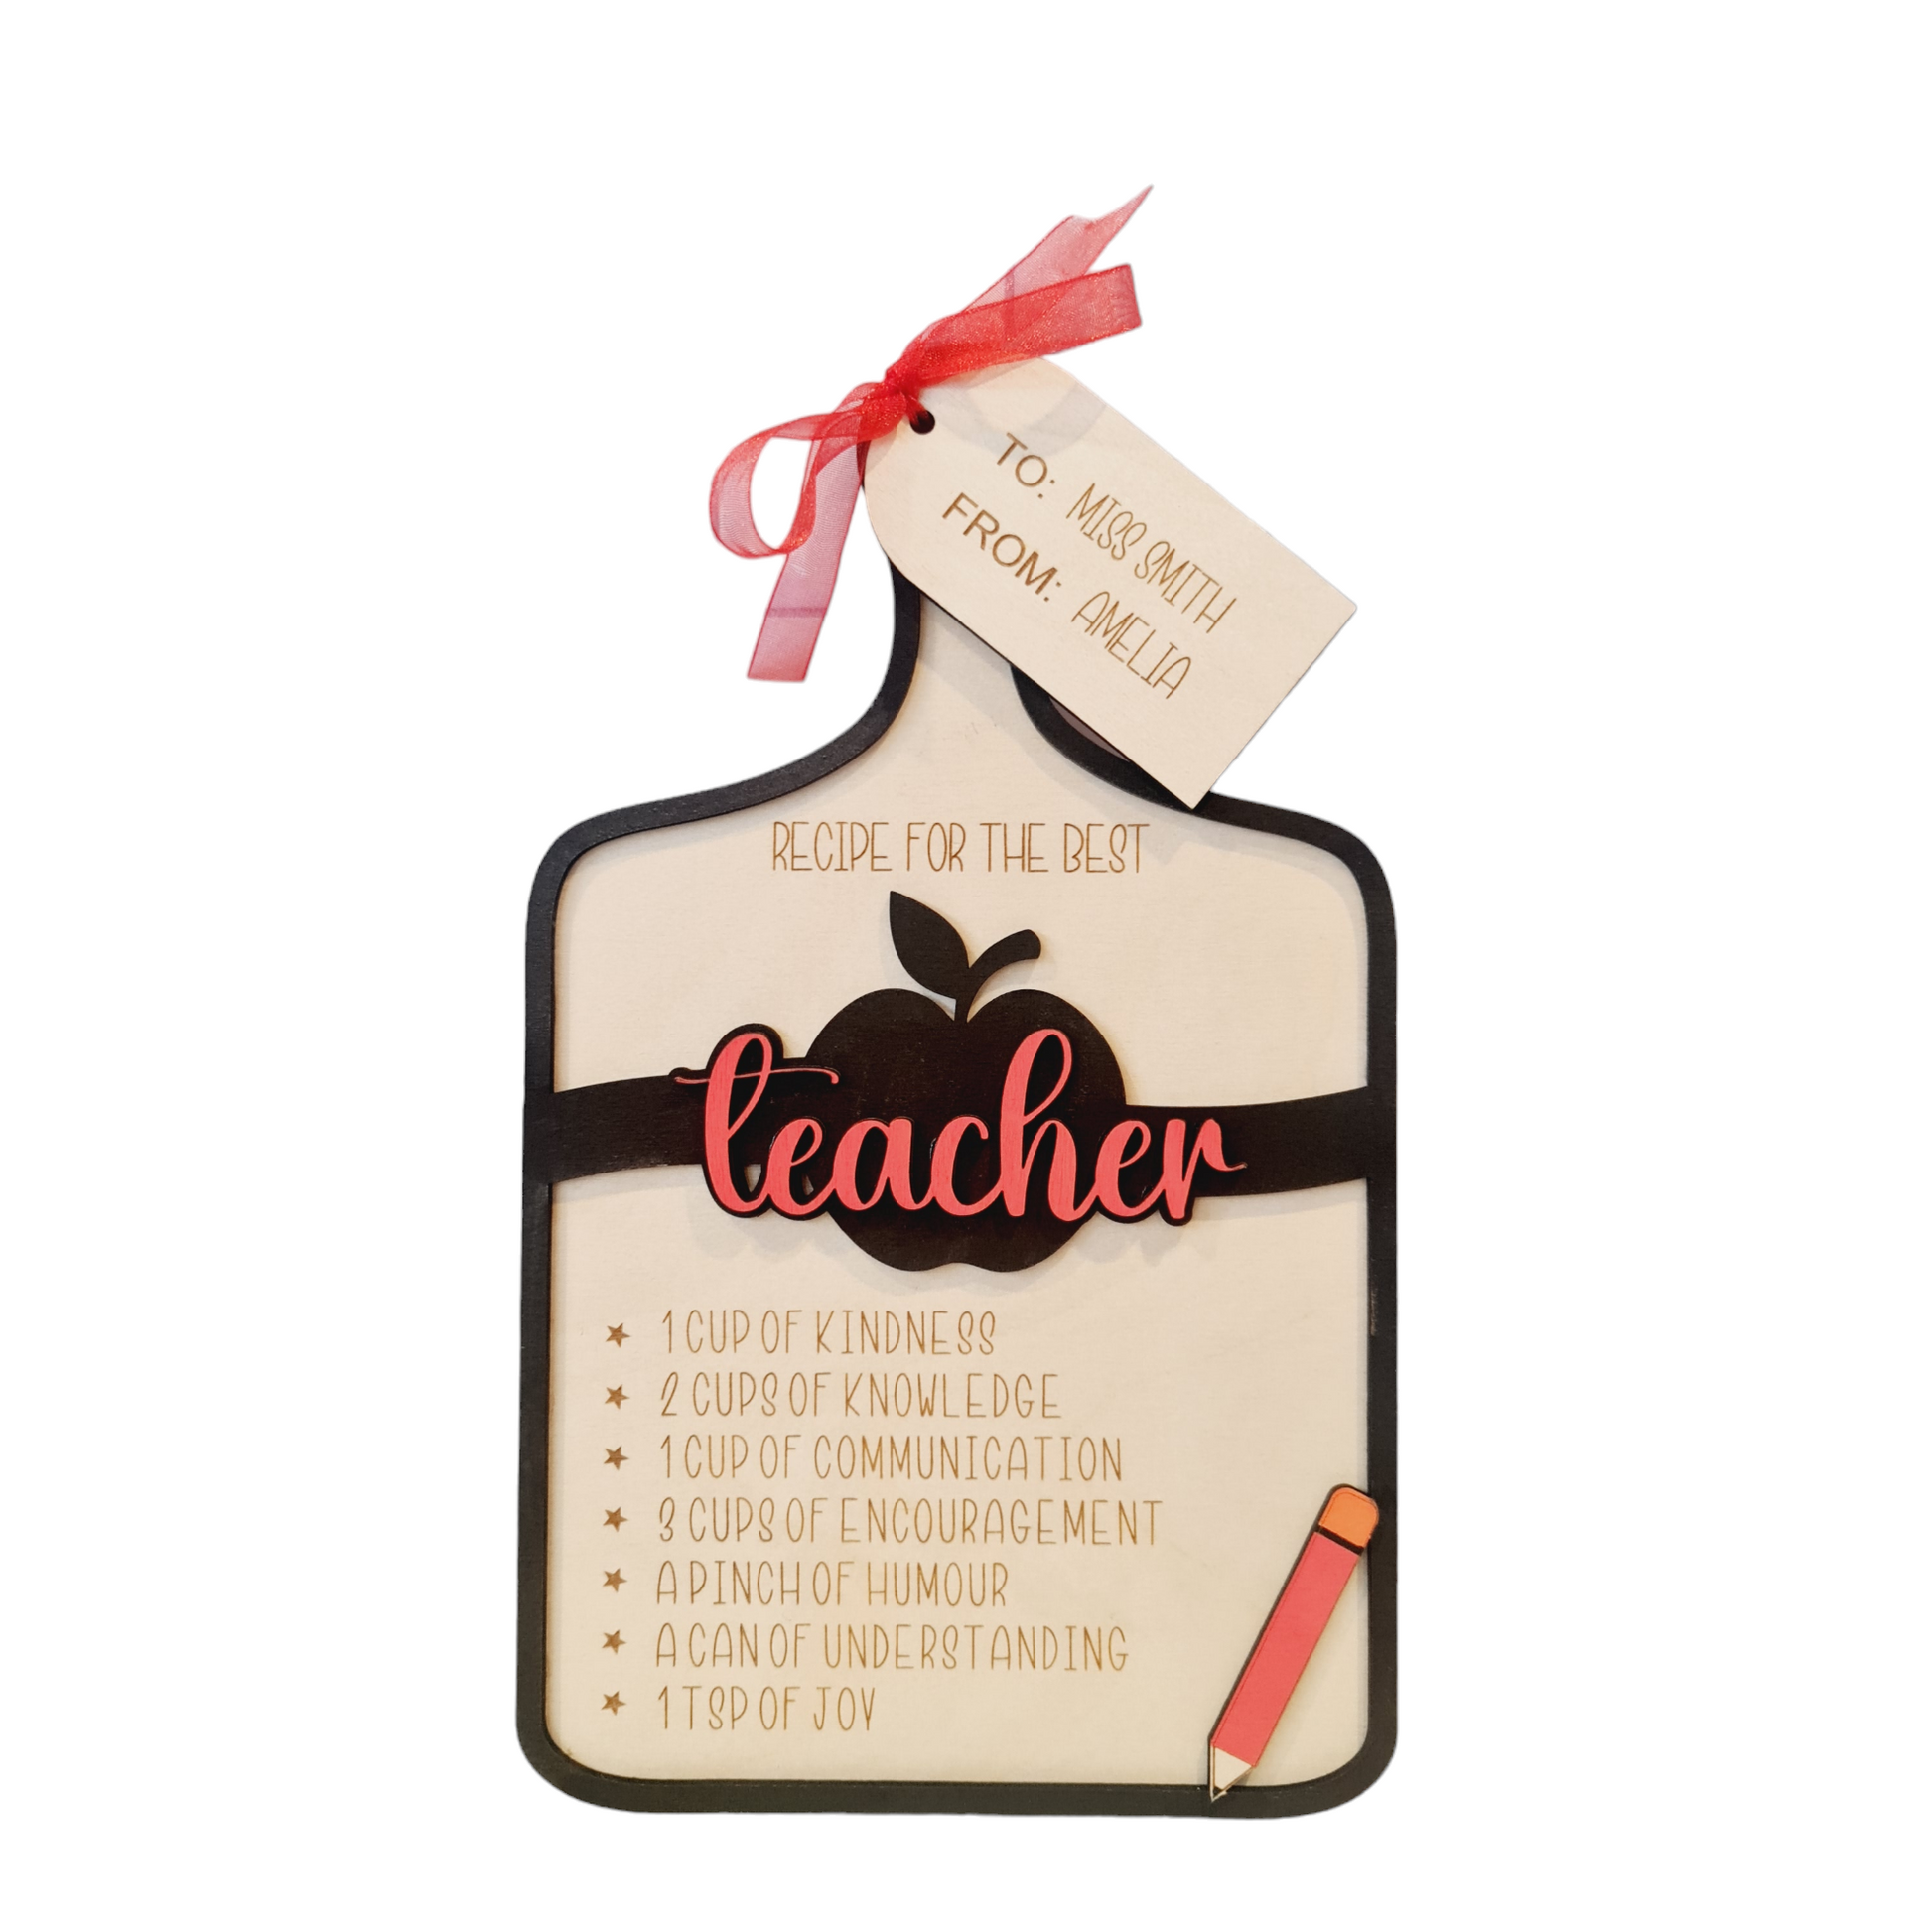 Receipe for the best teacher - teacher gift with personalised gift tag